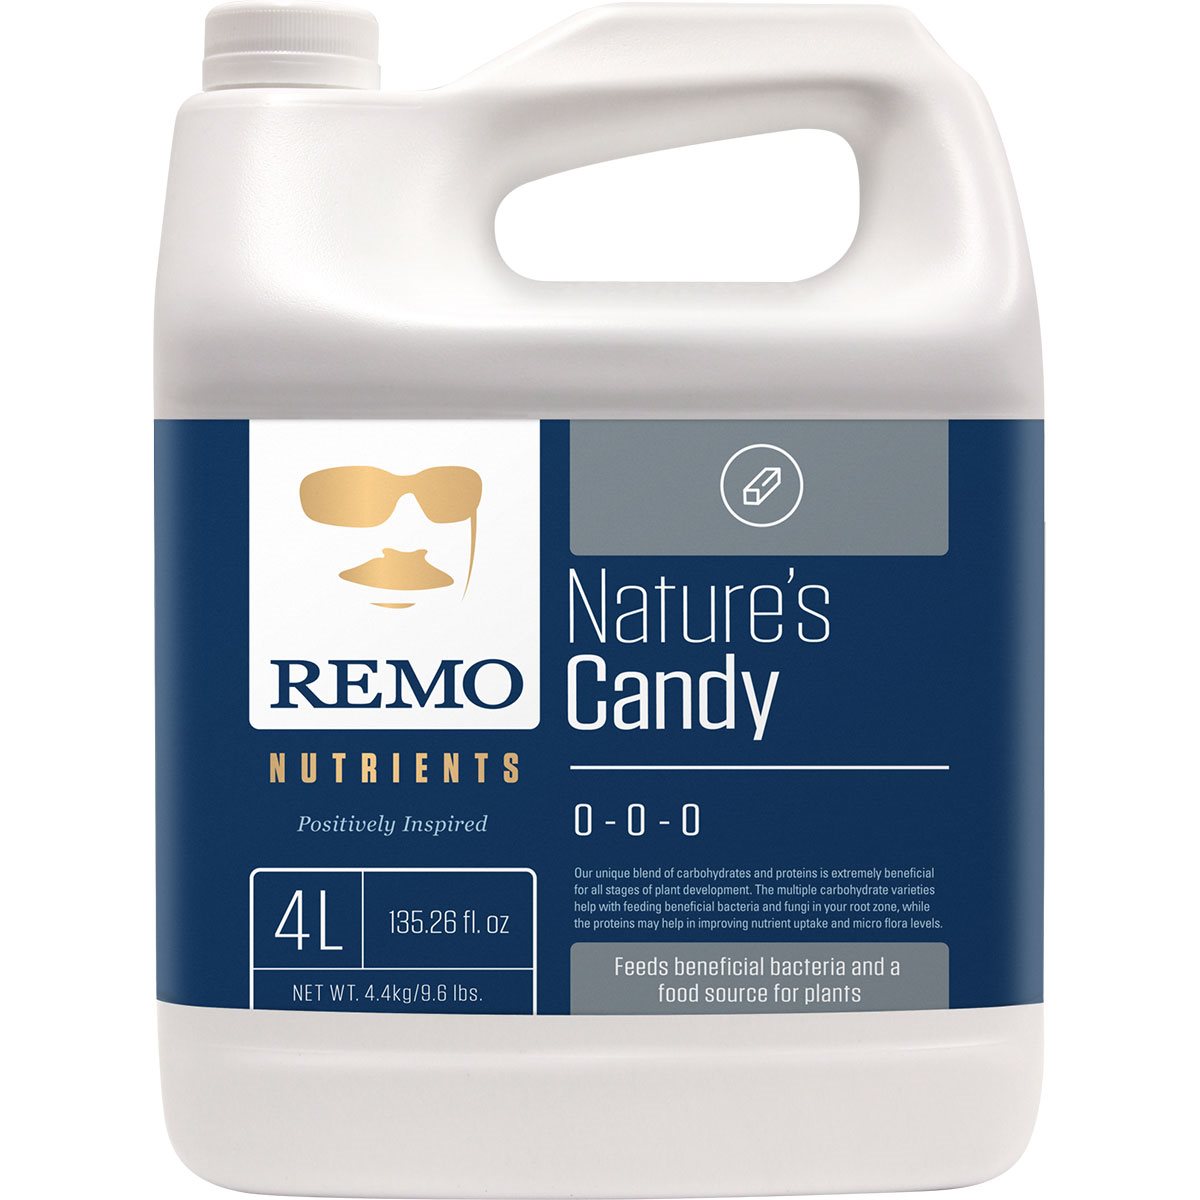 Remo Nature’s Candy 4 Liter